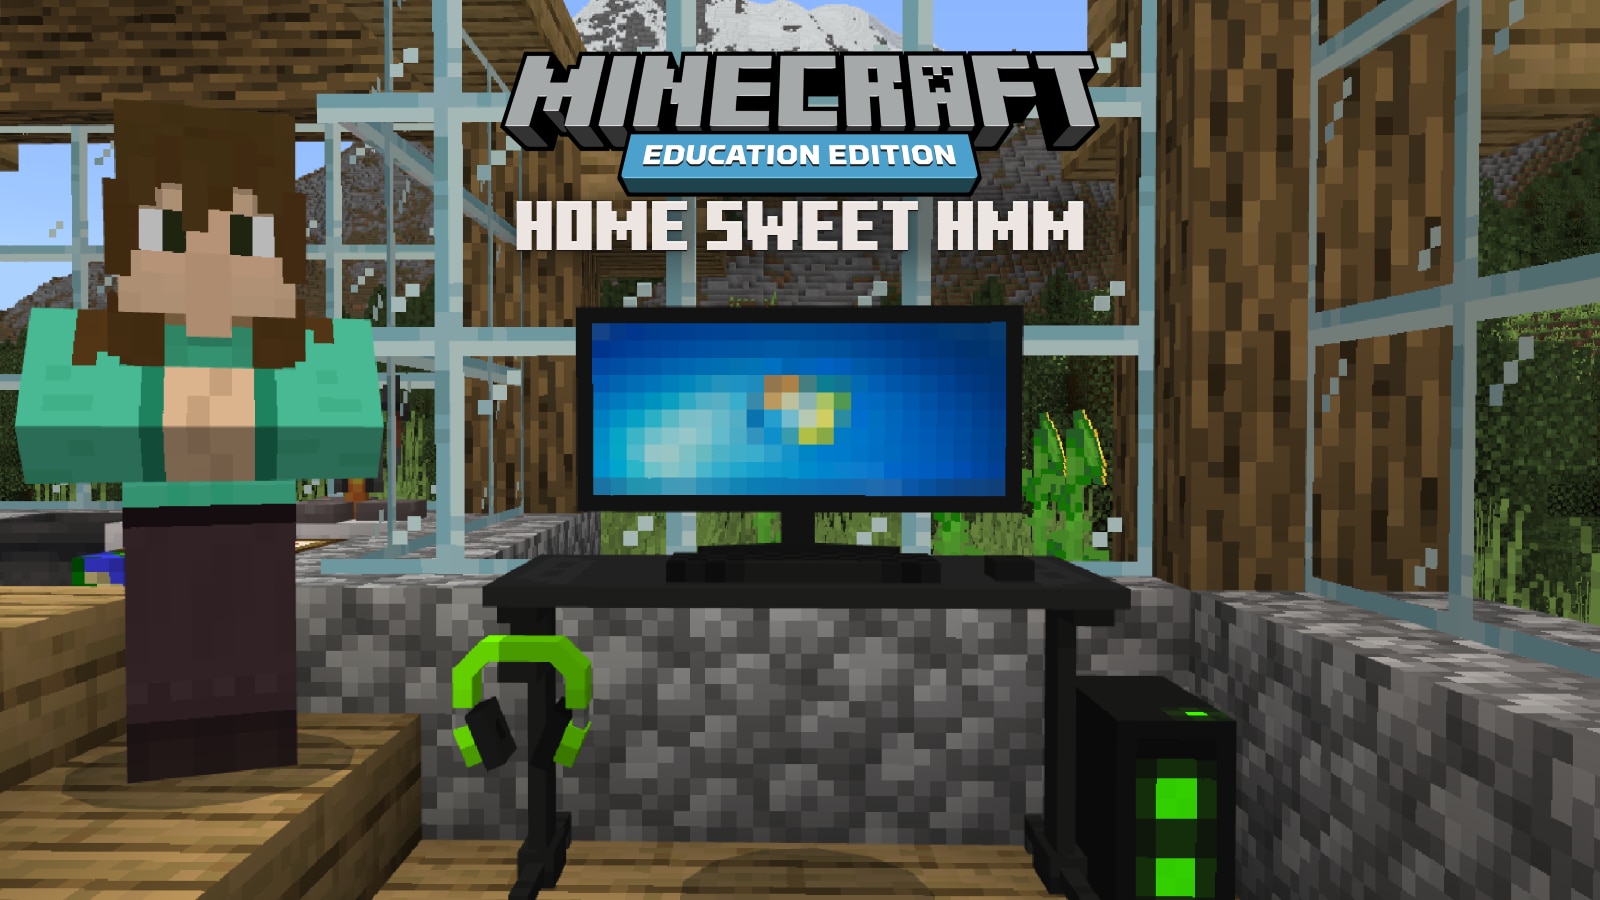 Minecraft Education Edition: Home Sweet hmm